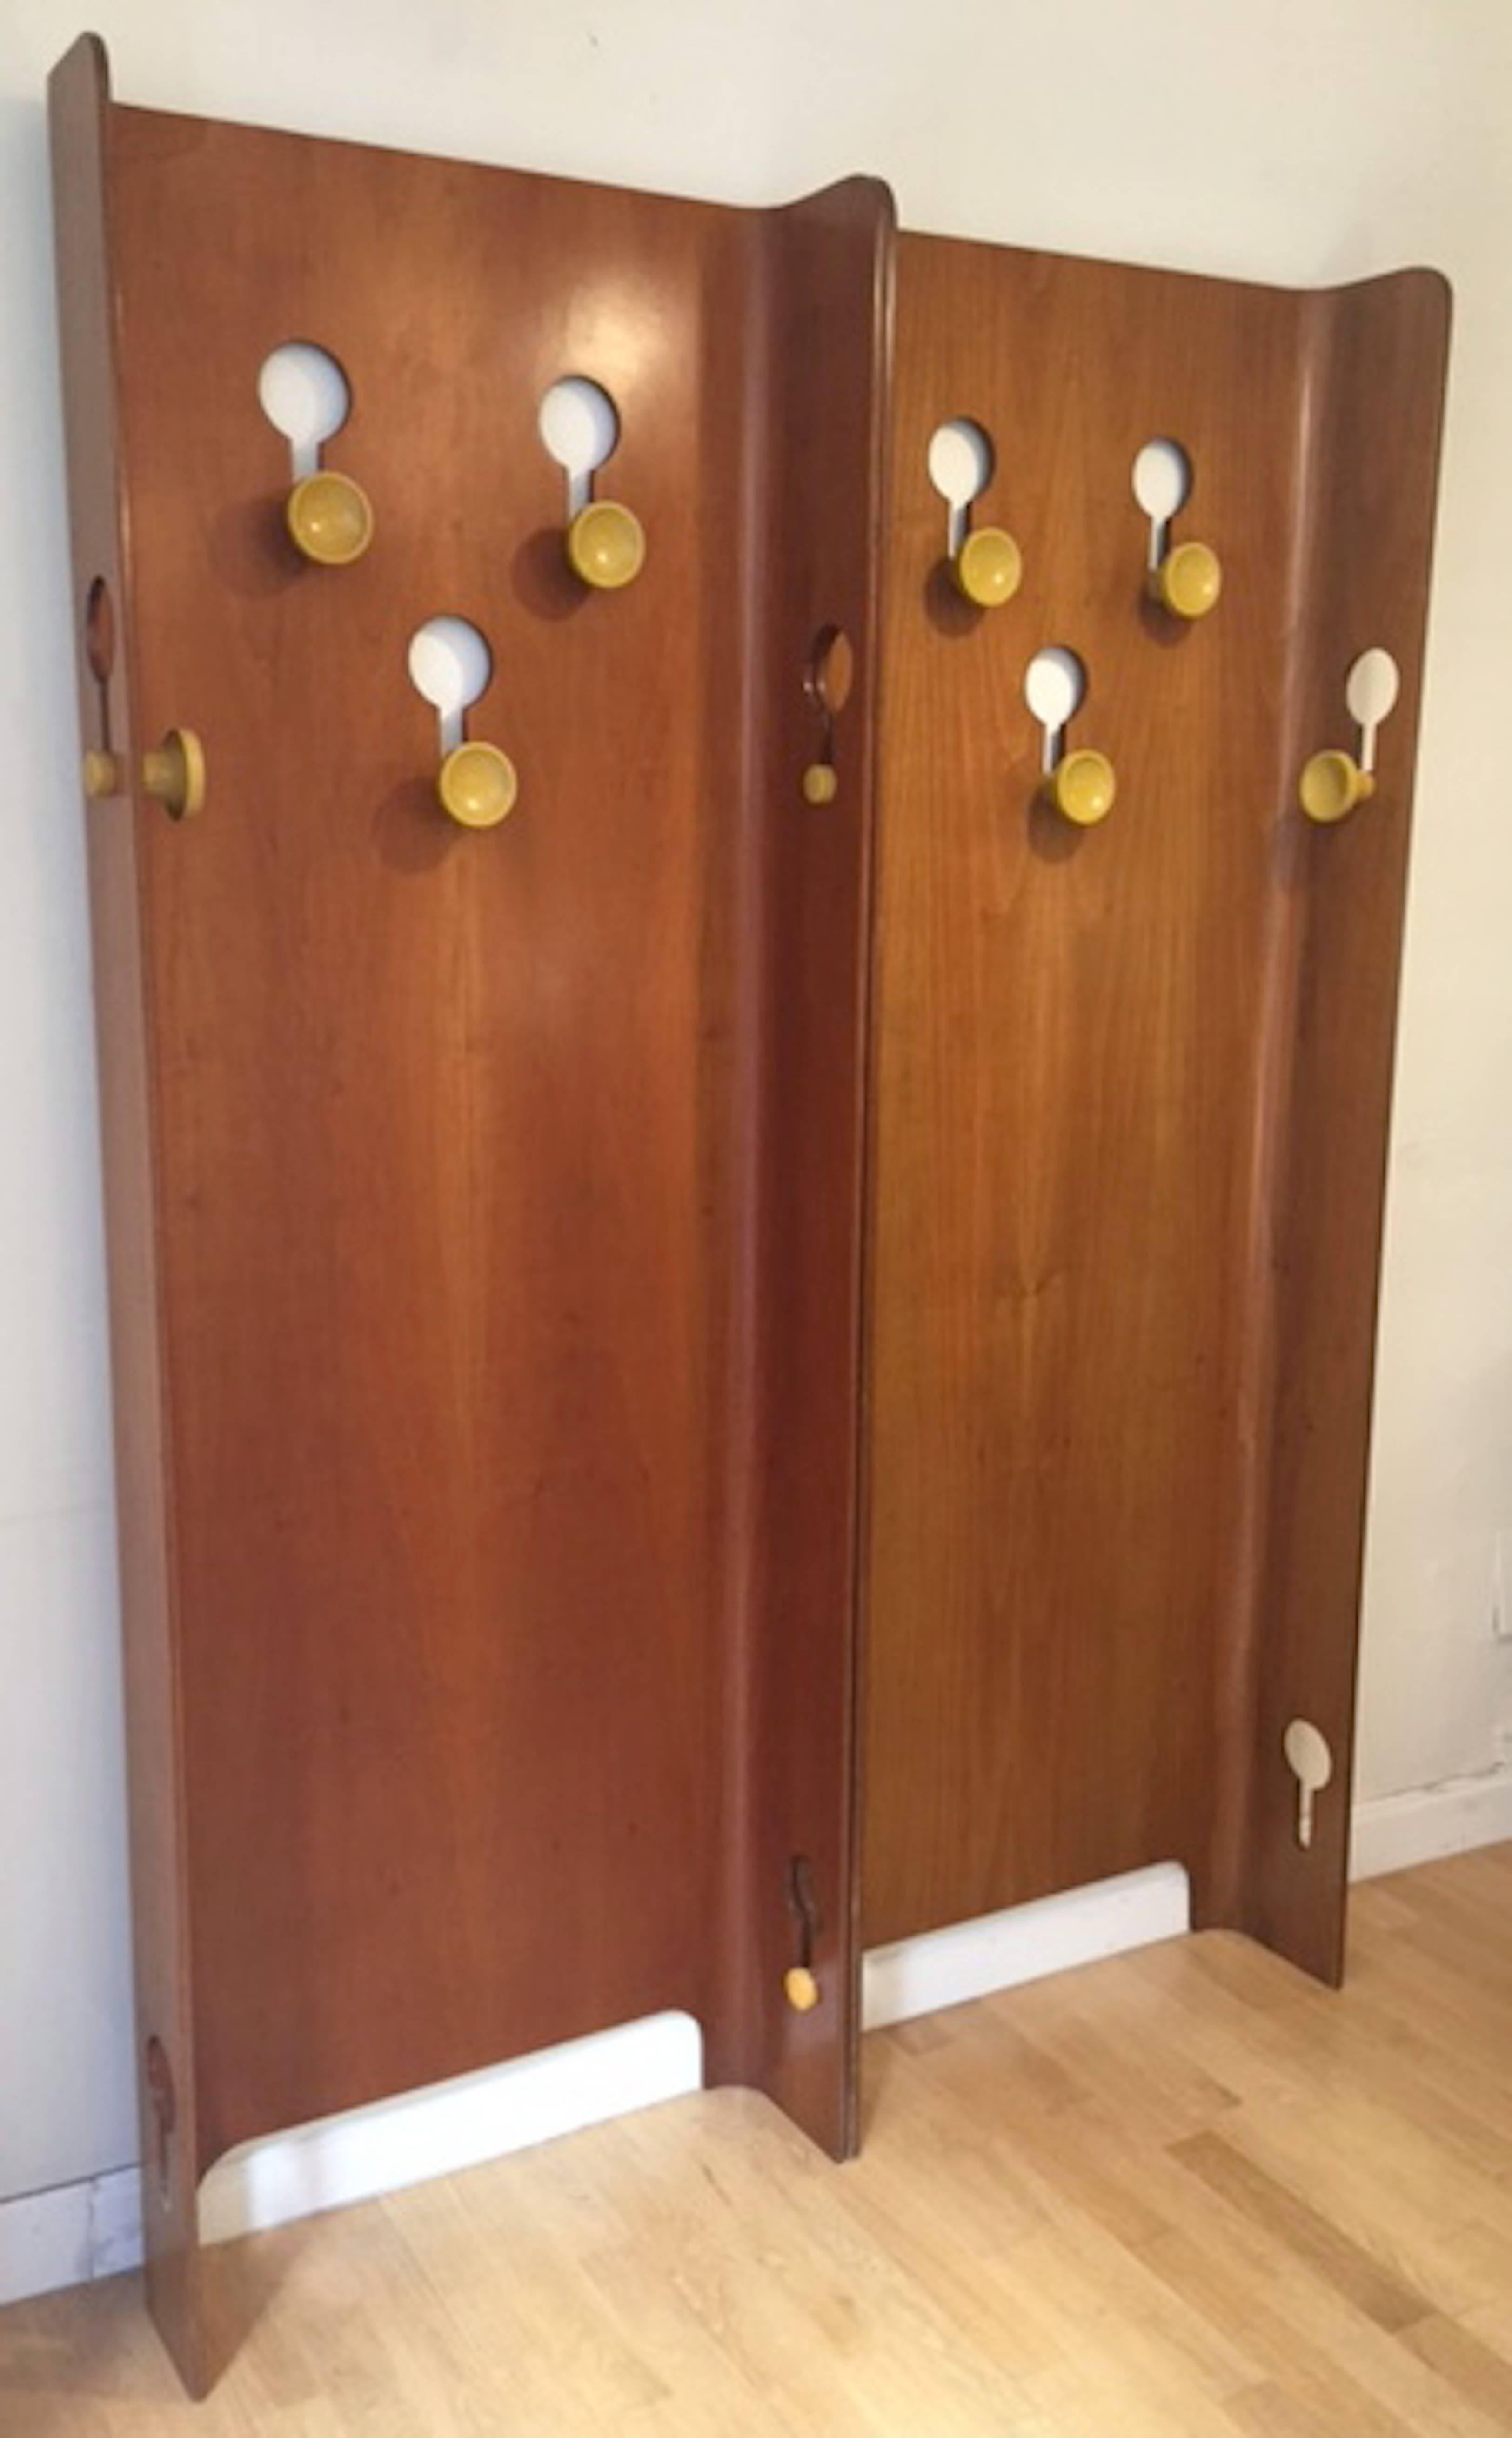 A very rare Midcentury rack coat made in 1955 by Fiarn, Venice (Italy). Walnut plymouth wood and bakelite hooks.
Excellent condition.